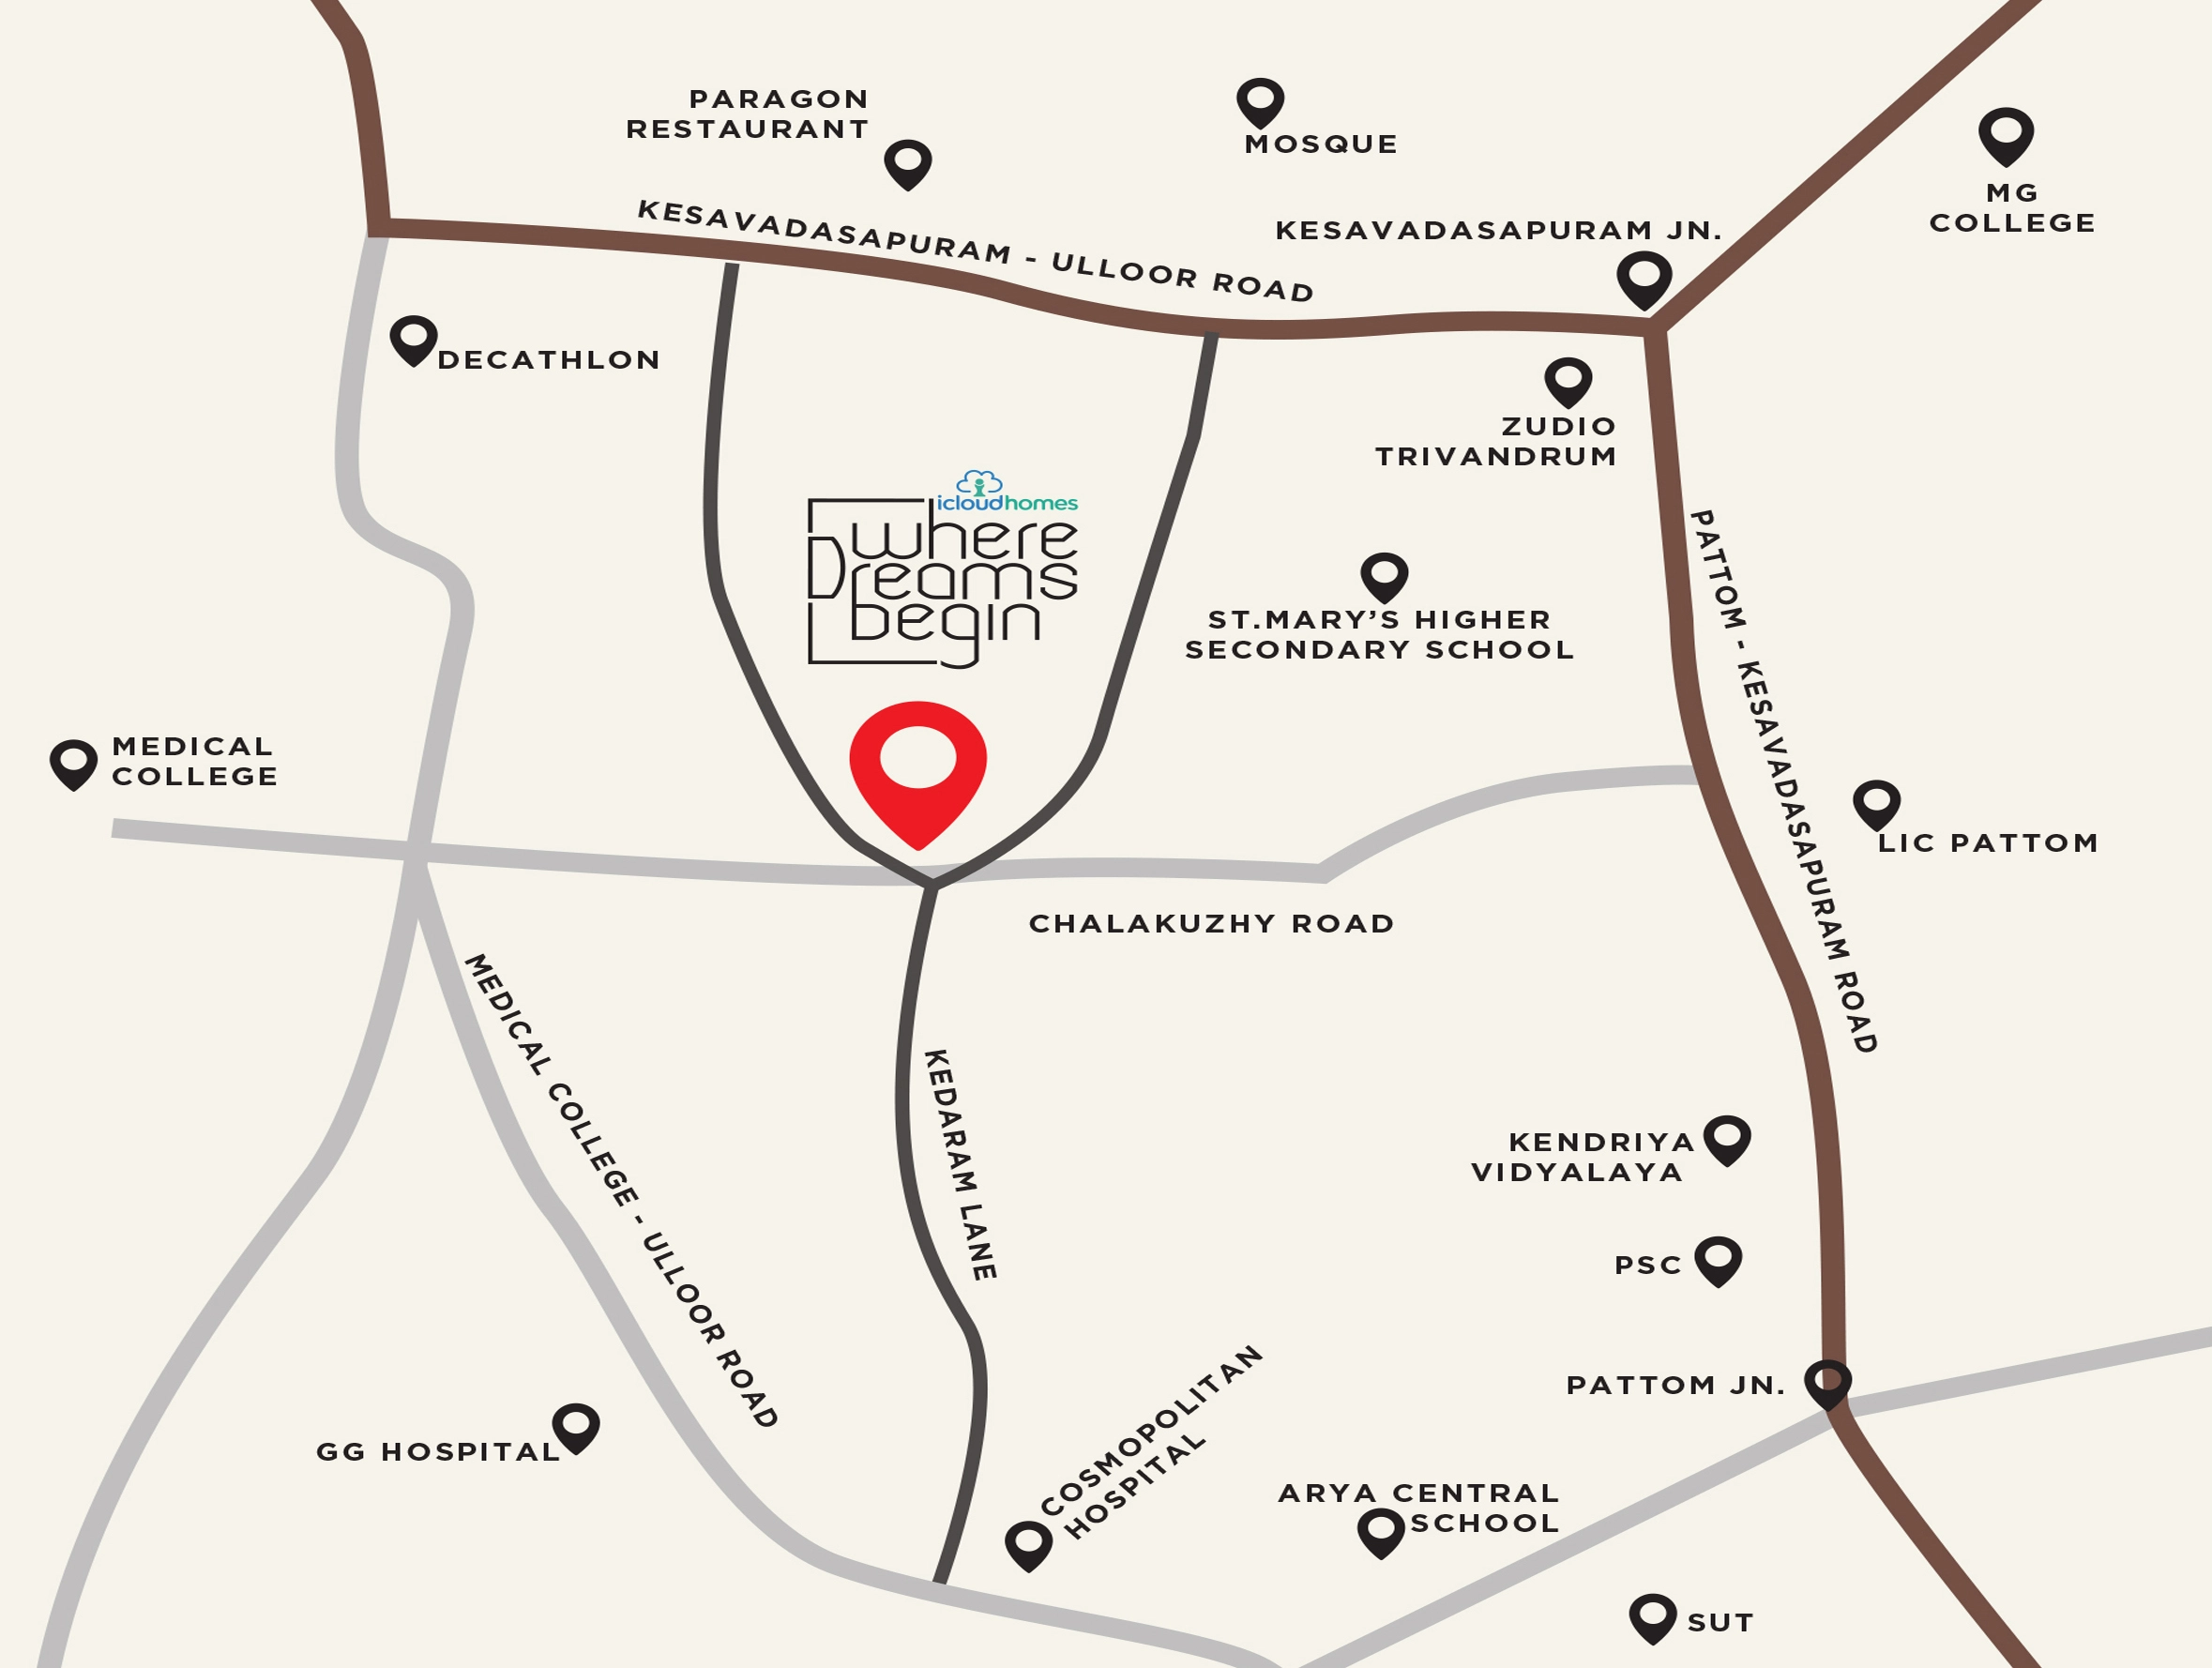 find the location of where dreams begin luxury apartments in Pattom, Trivandrum